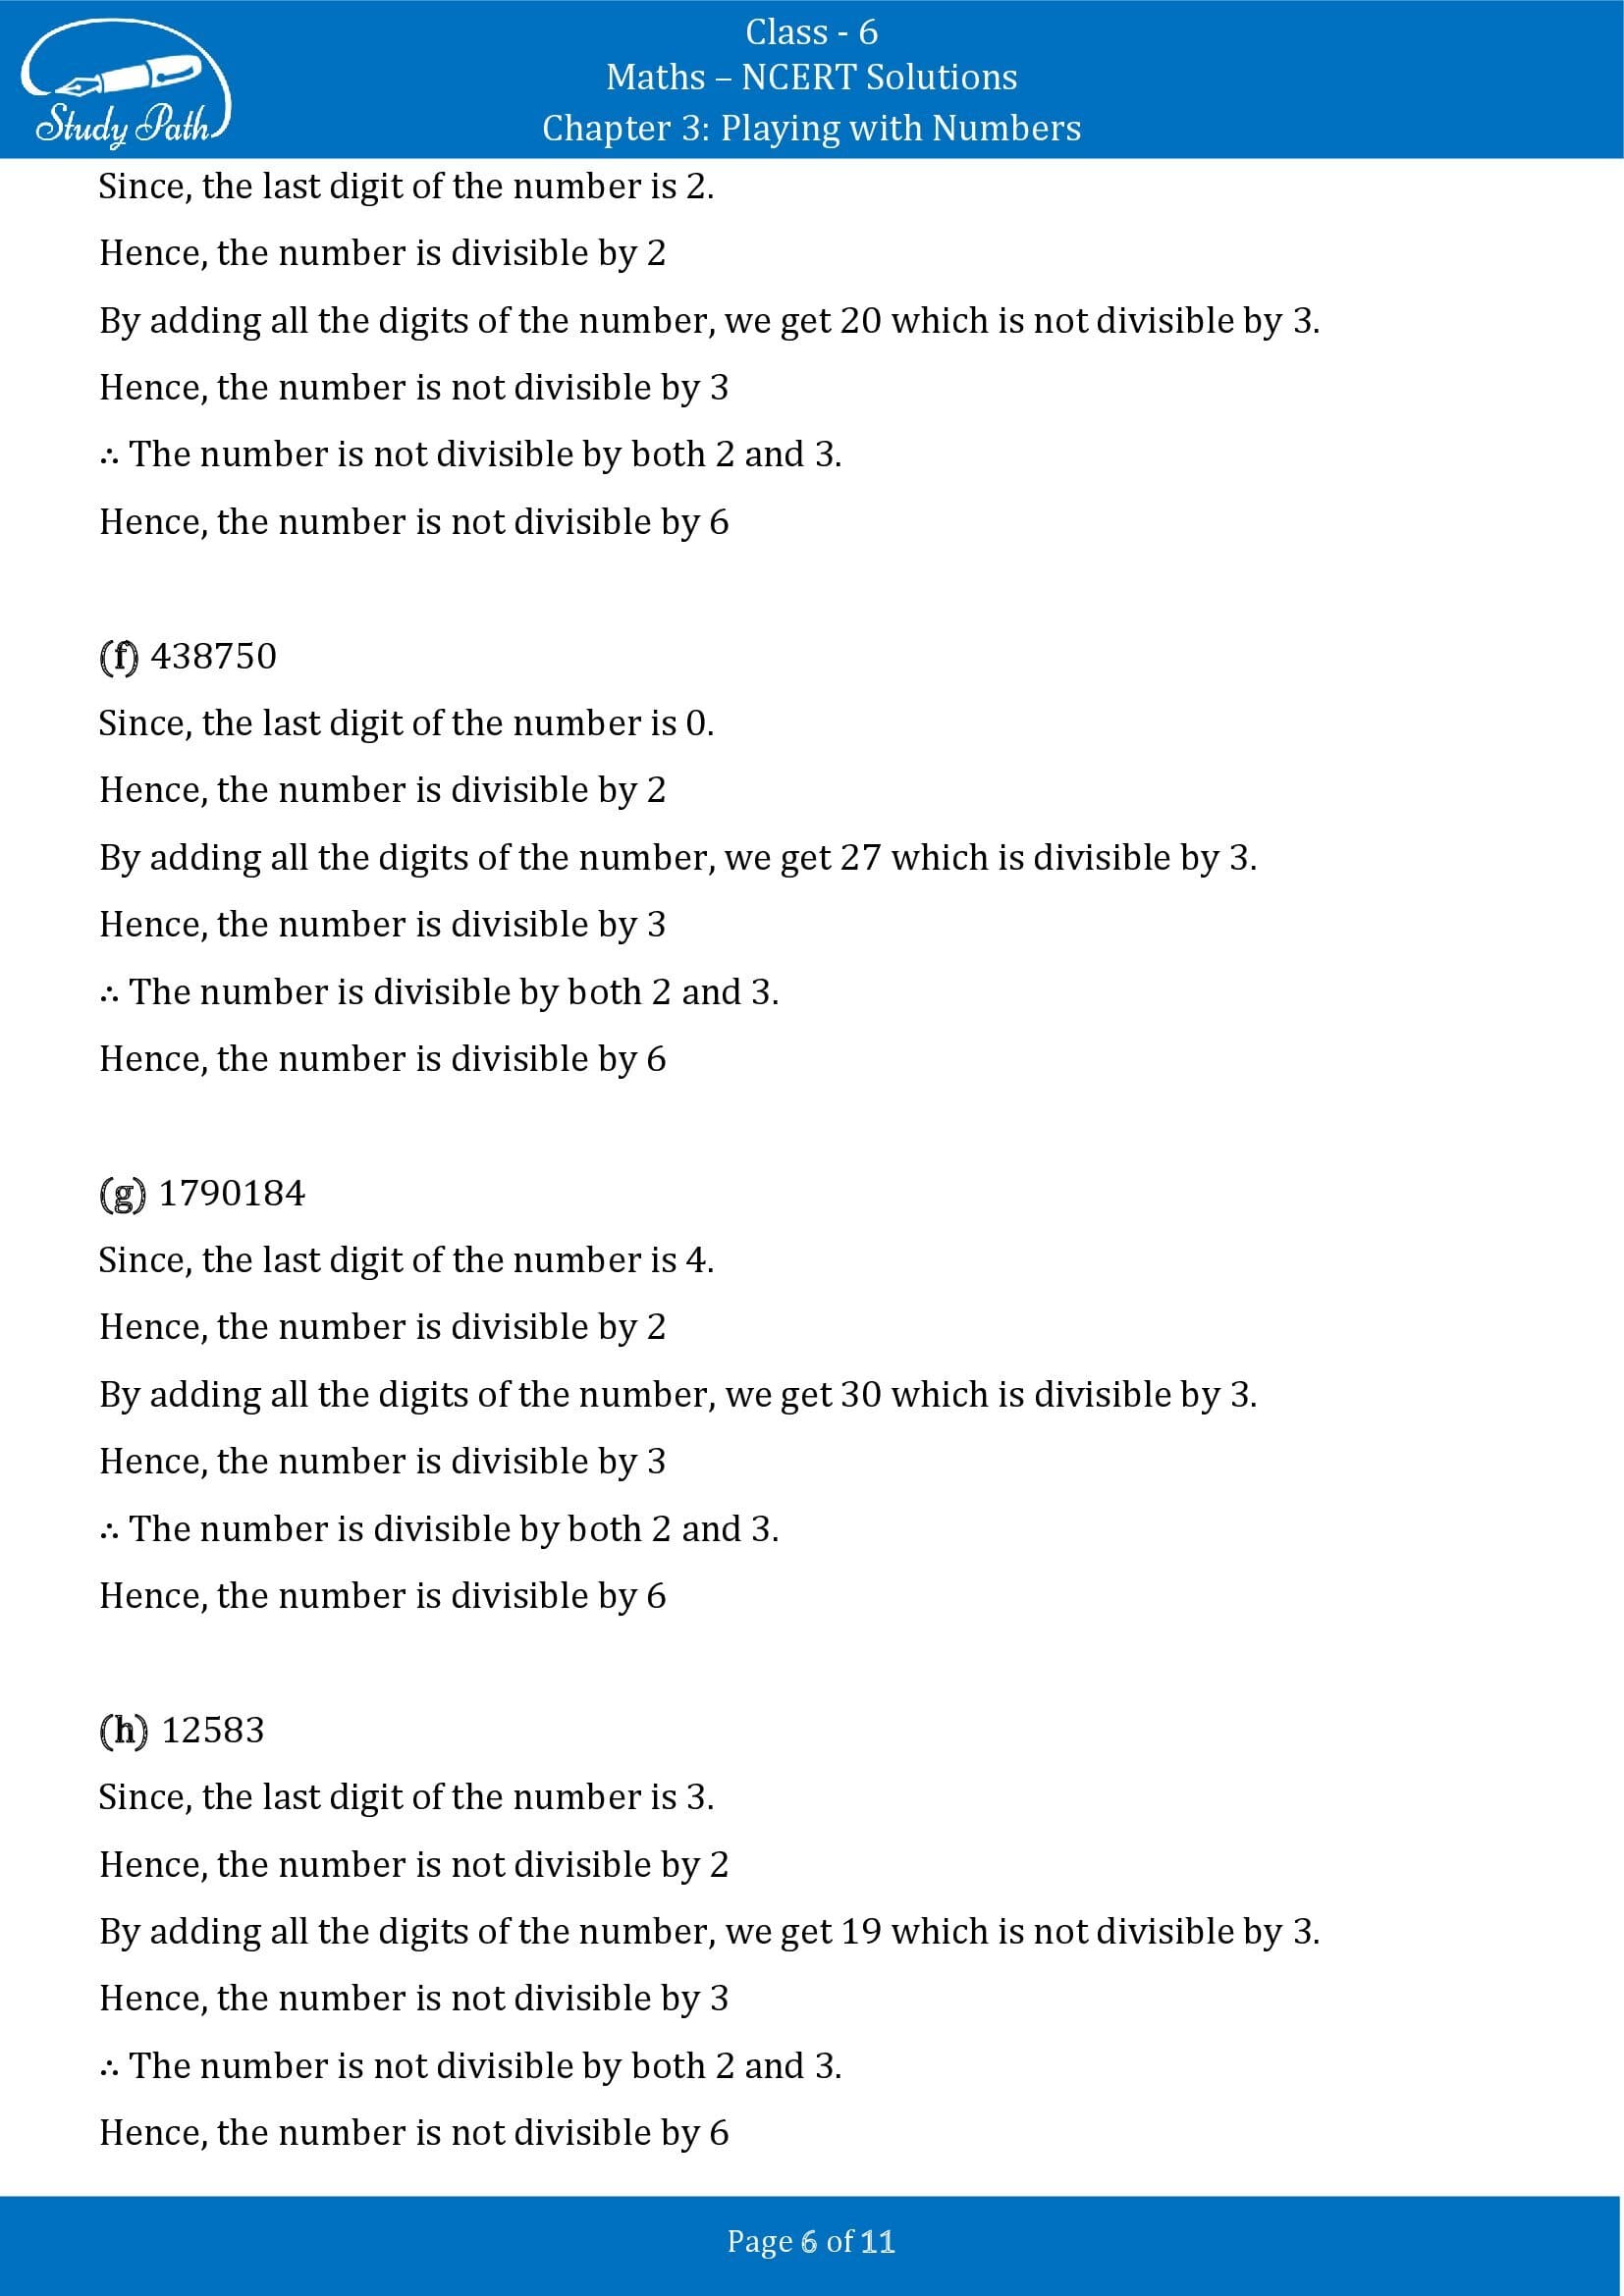 NCERT Solutions for Class 6 Maths Chapter 3 Playing with Numbers Exercise 3.3 00006